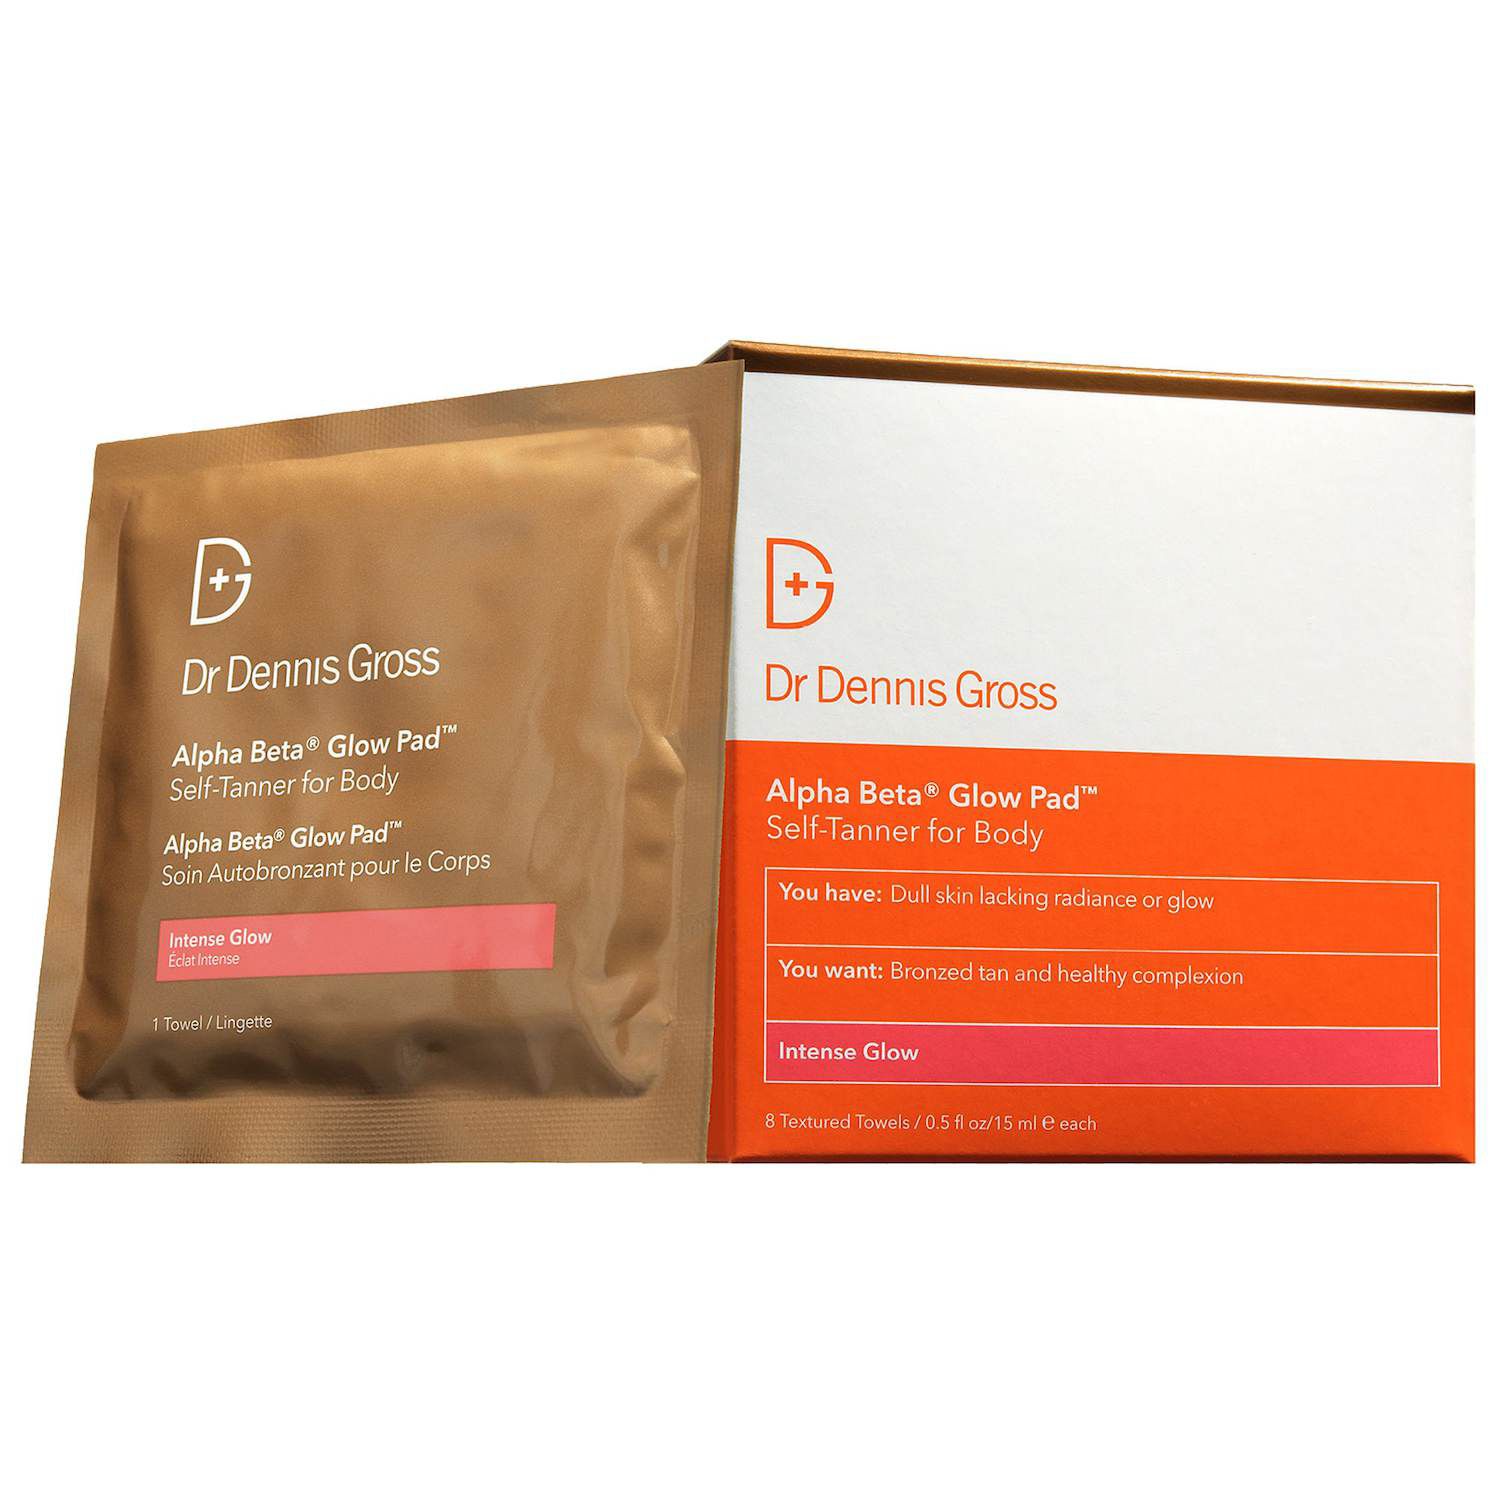 Image for Dr. Dennis Gross Skincare Alpha Beta Glow Pad For Body With Active Vitamin D at Kohl's.